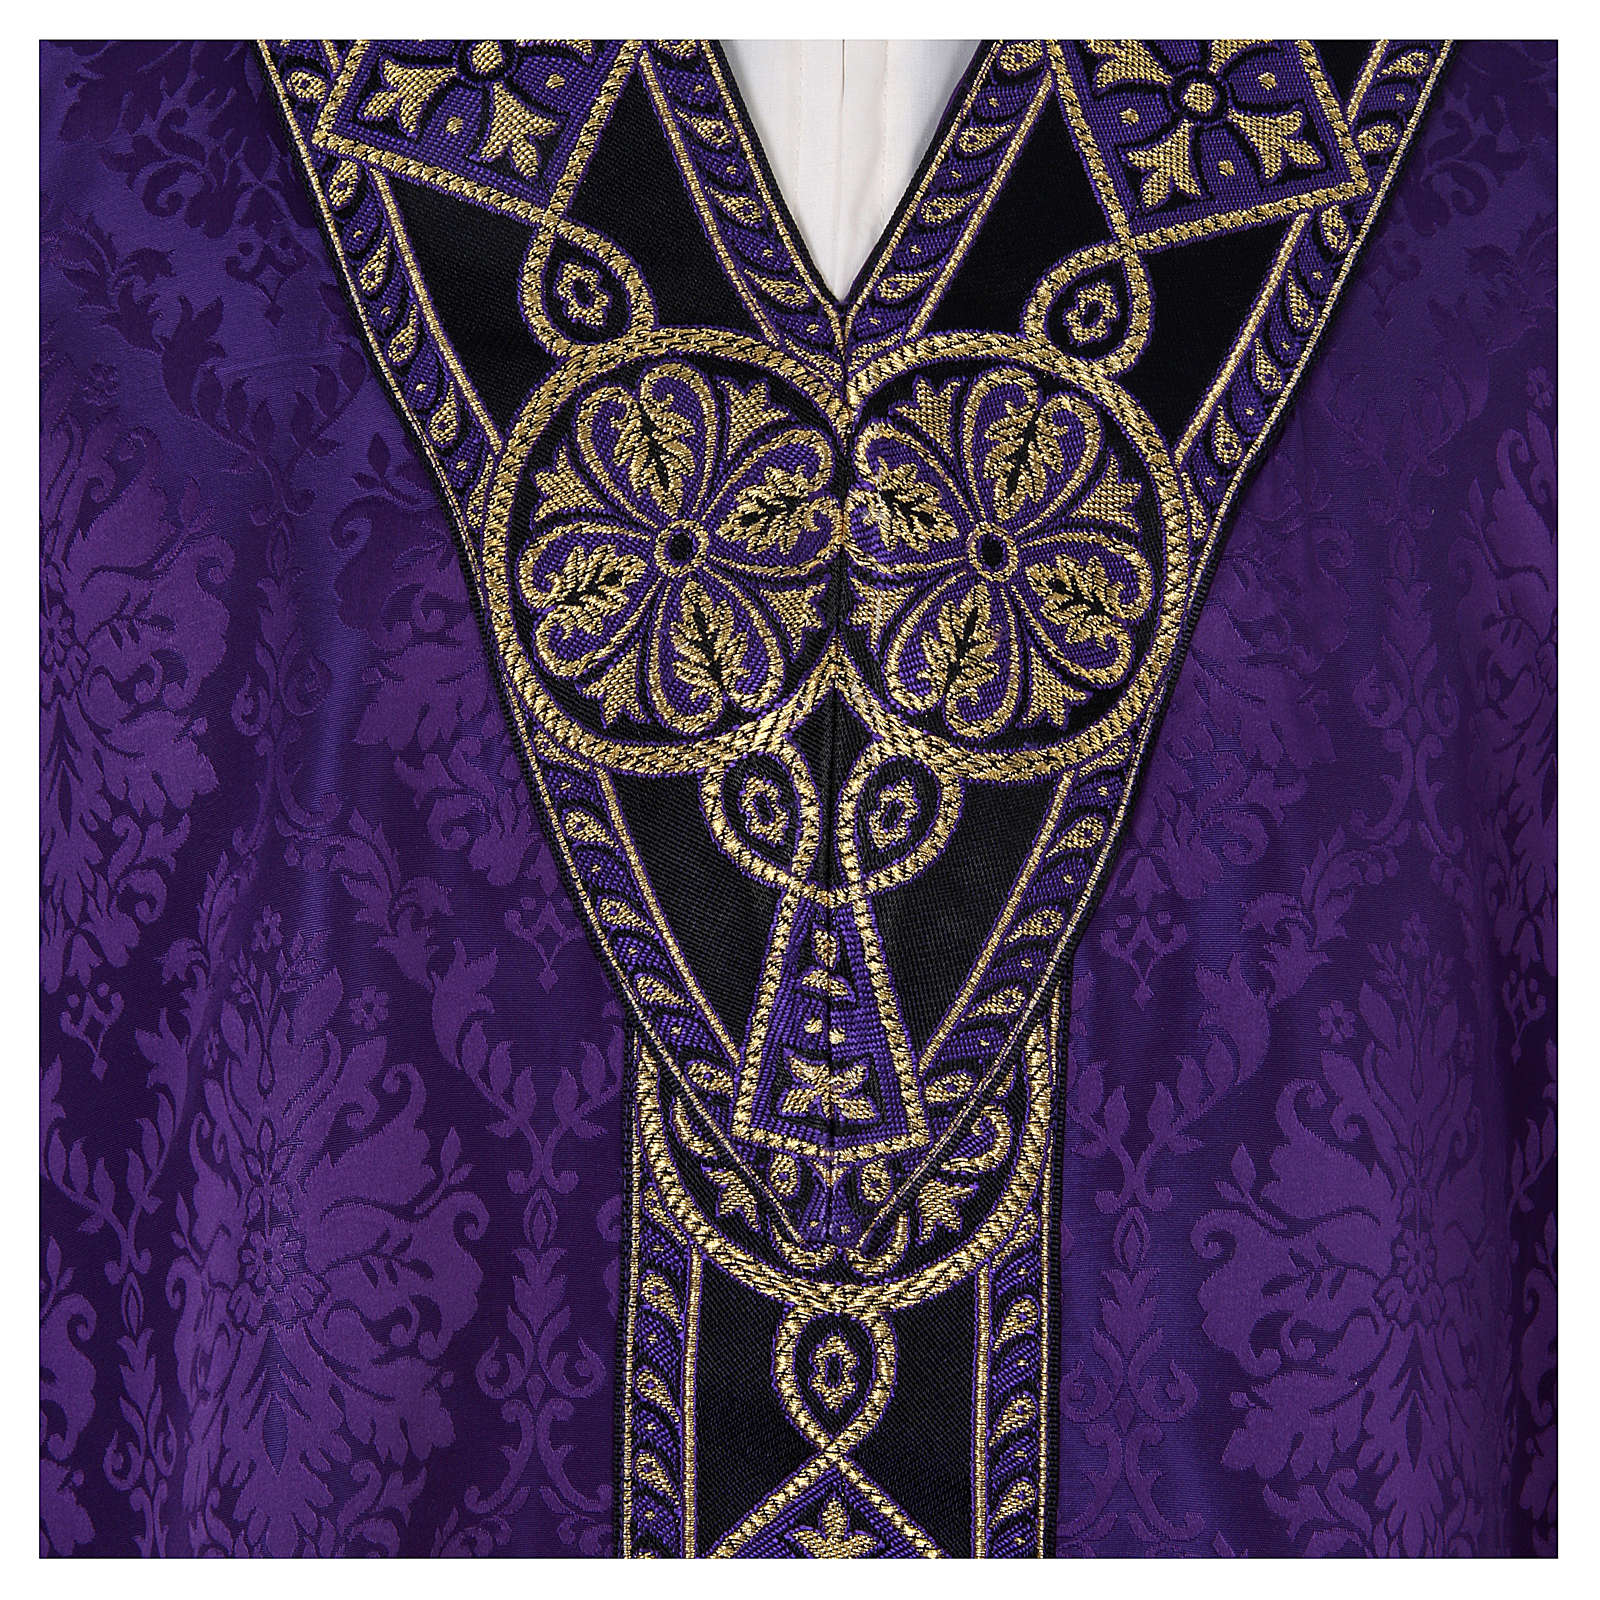 Catholic Priest Chasuble in damask sable | online sales on HOLYART.com